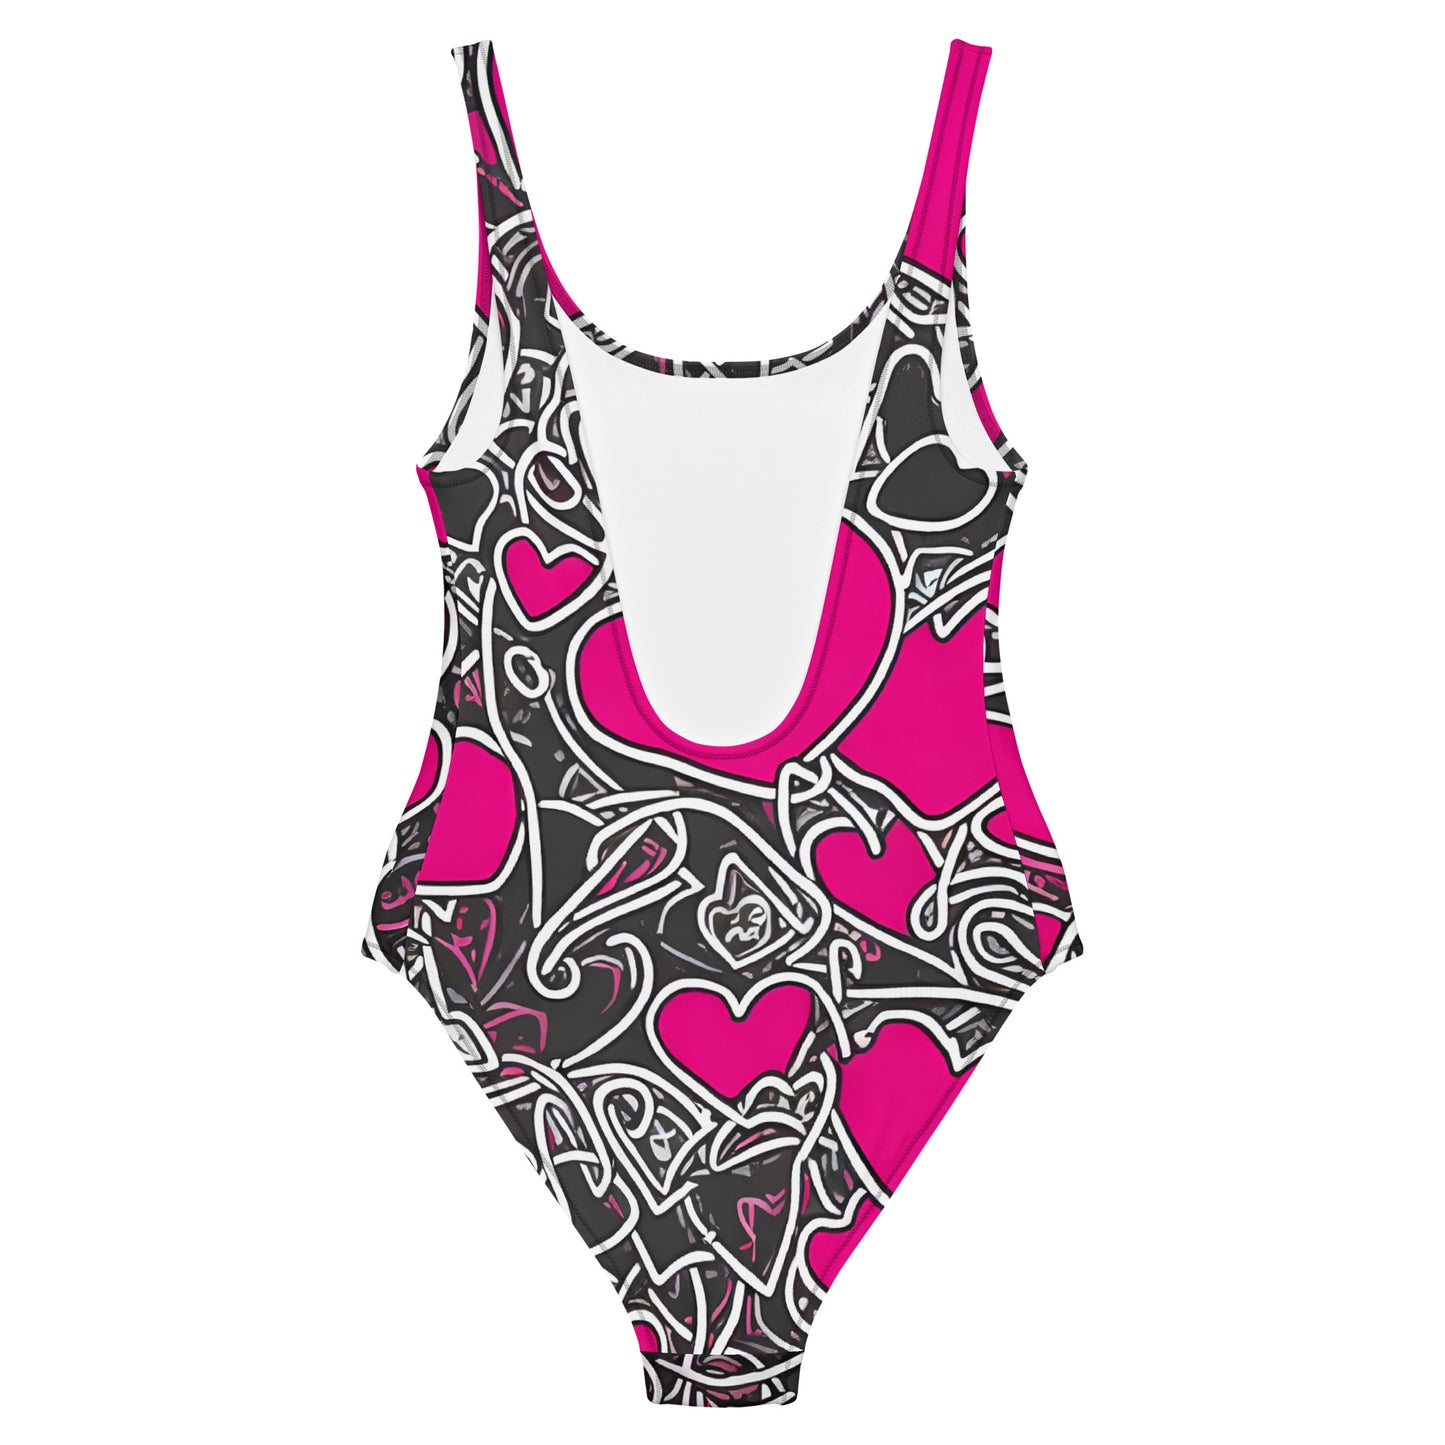 Crazy Heart : One-Piece Swimsuit